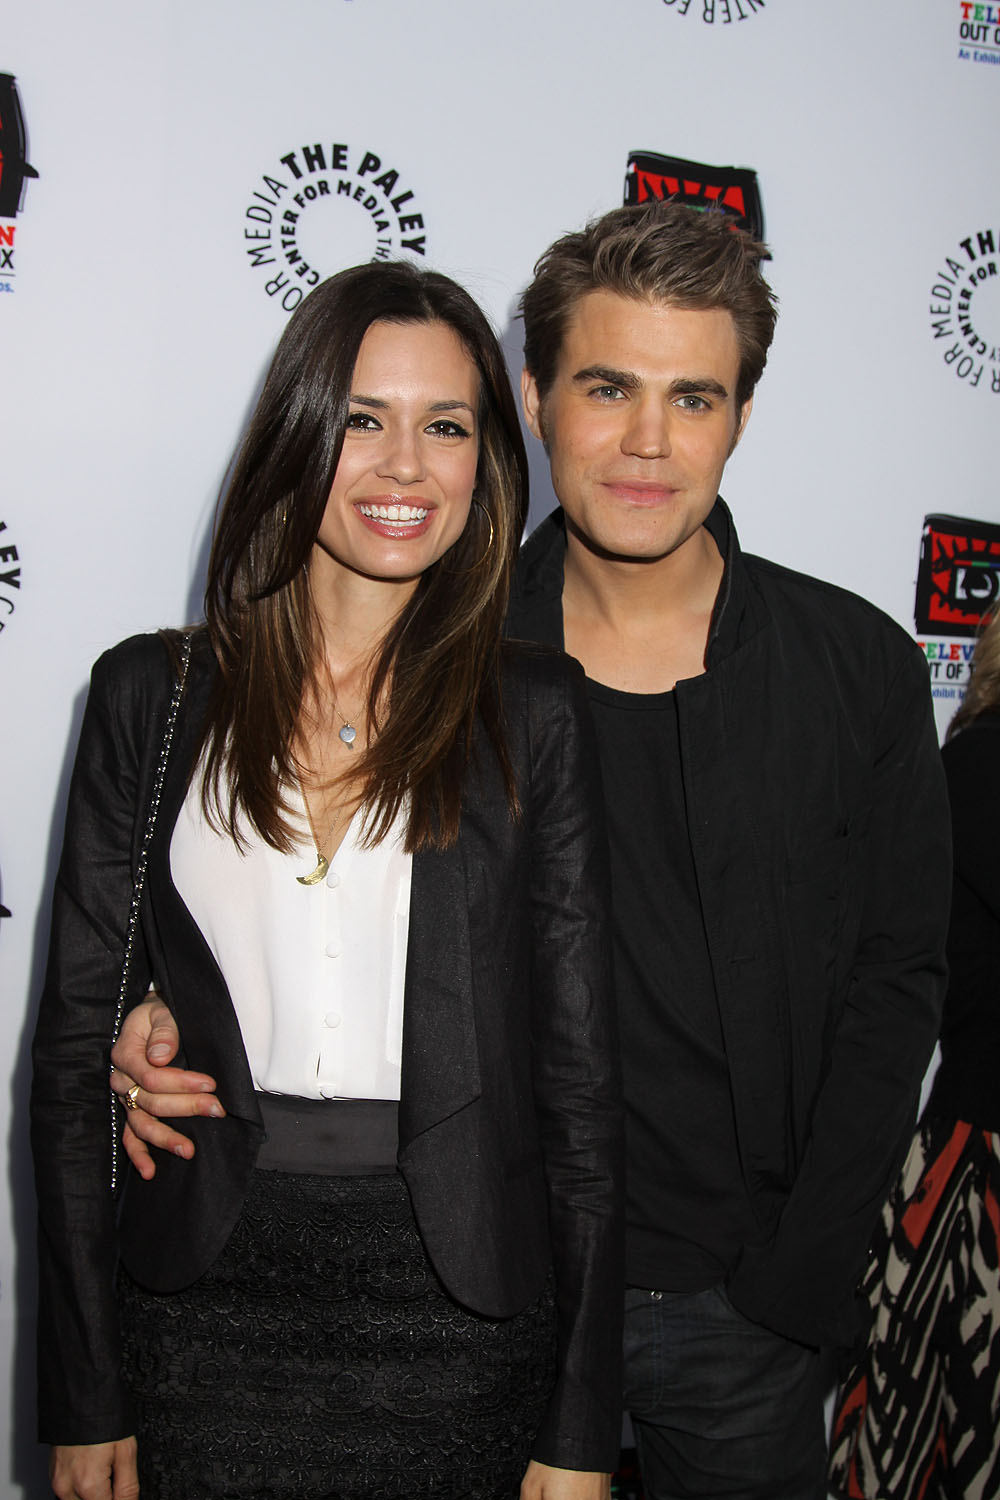 Paul Wesley has been in relationships with... 